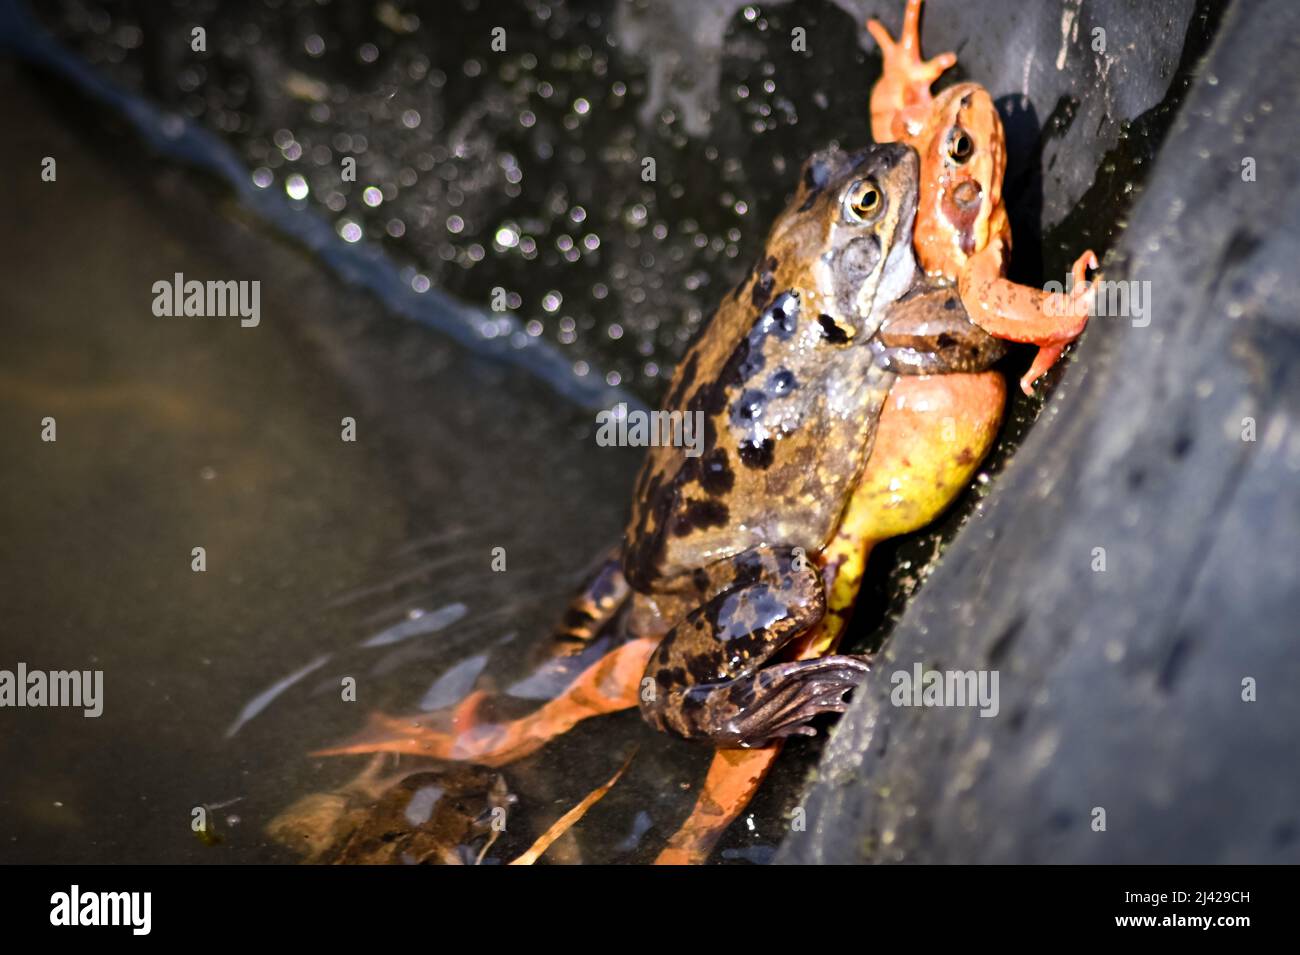 English common frogs, Rana temporaria mating on the side of a garden pond, the female a vibrant orange colour Stock Photo